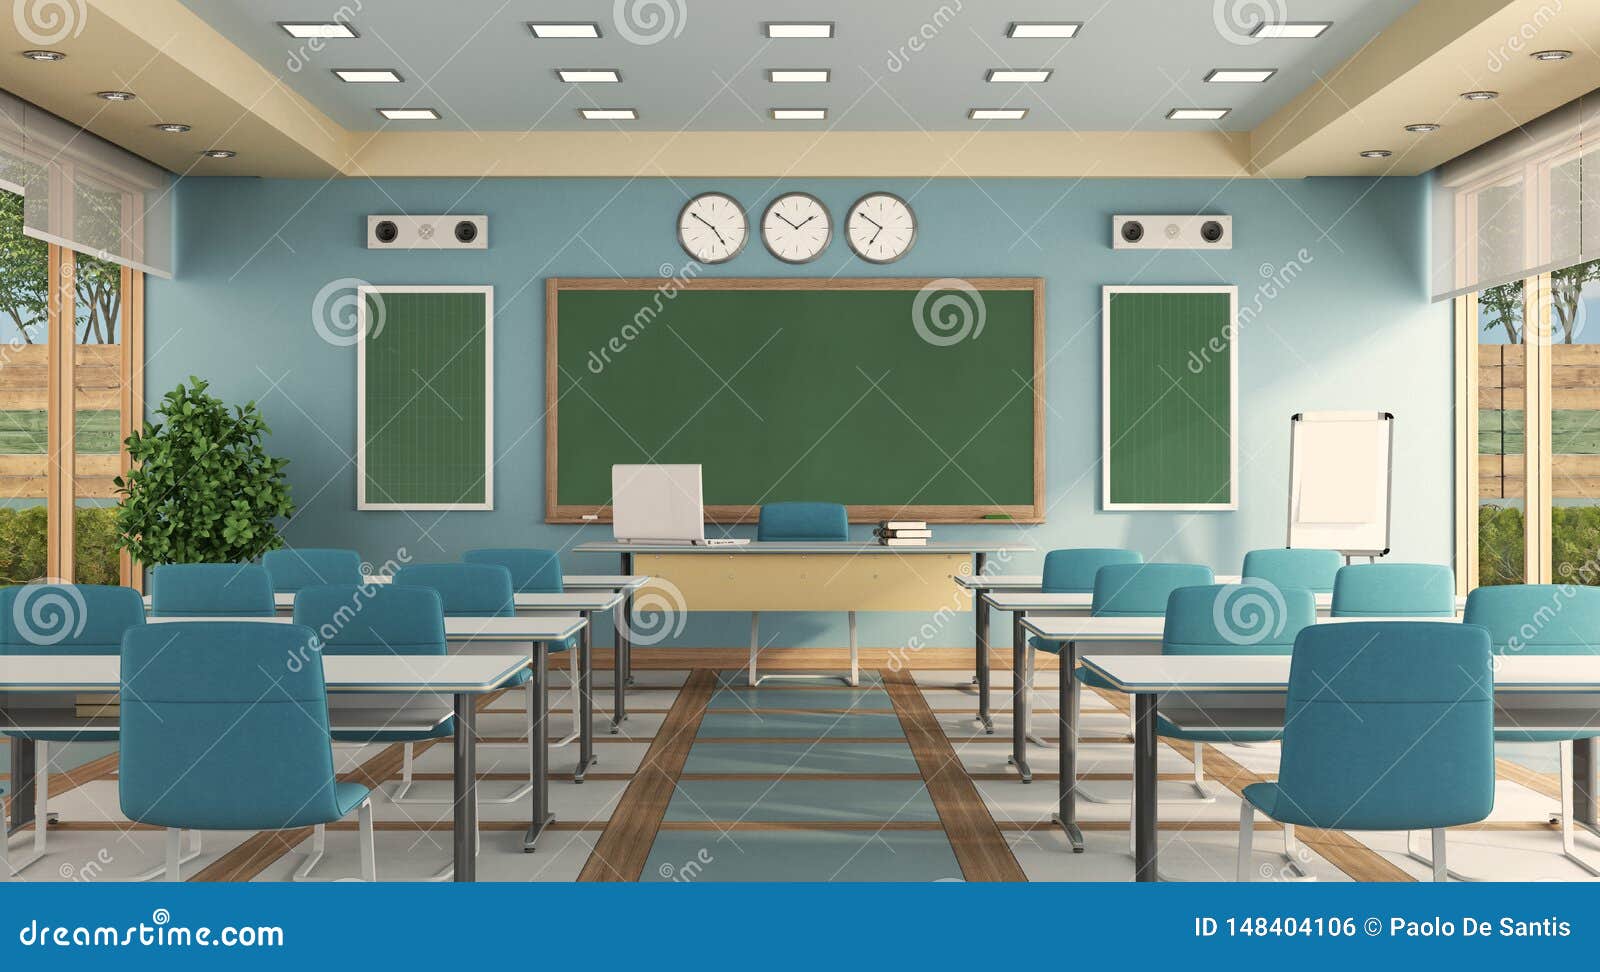 colorful classrom without student